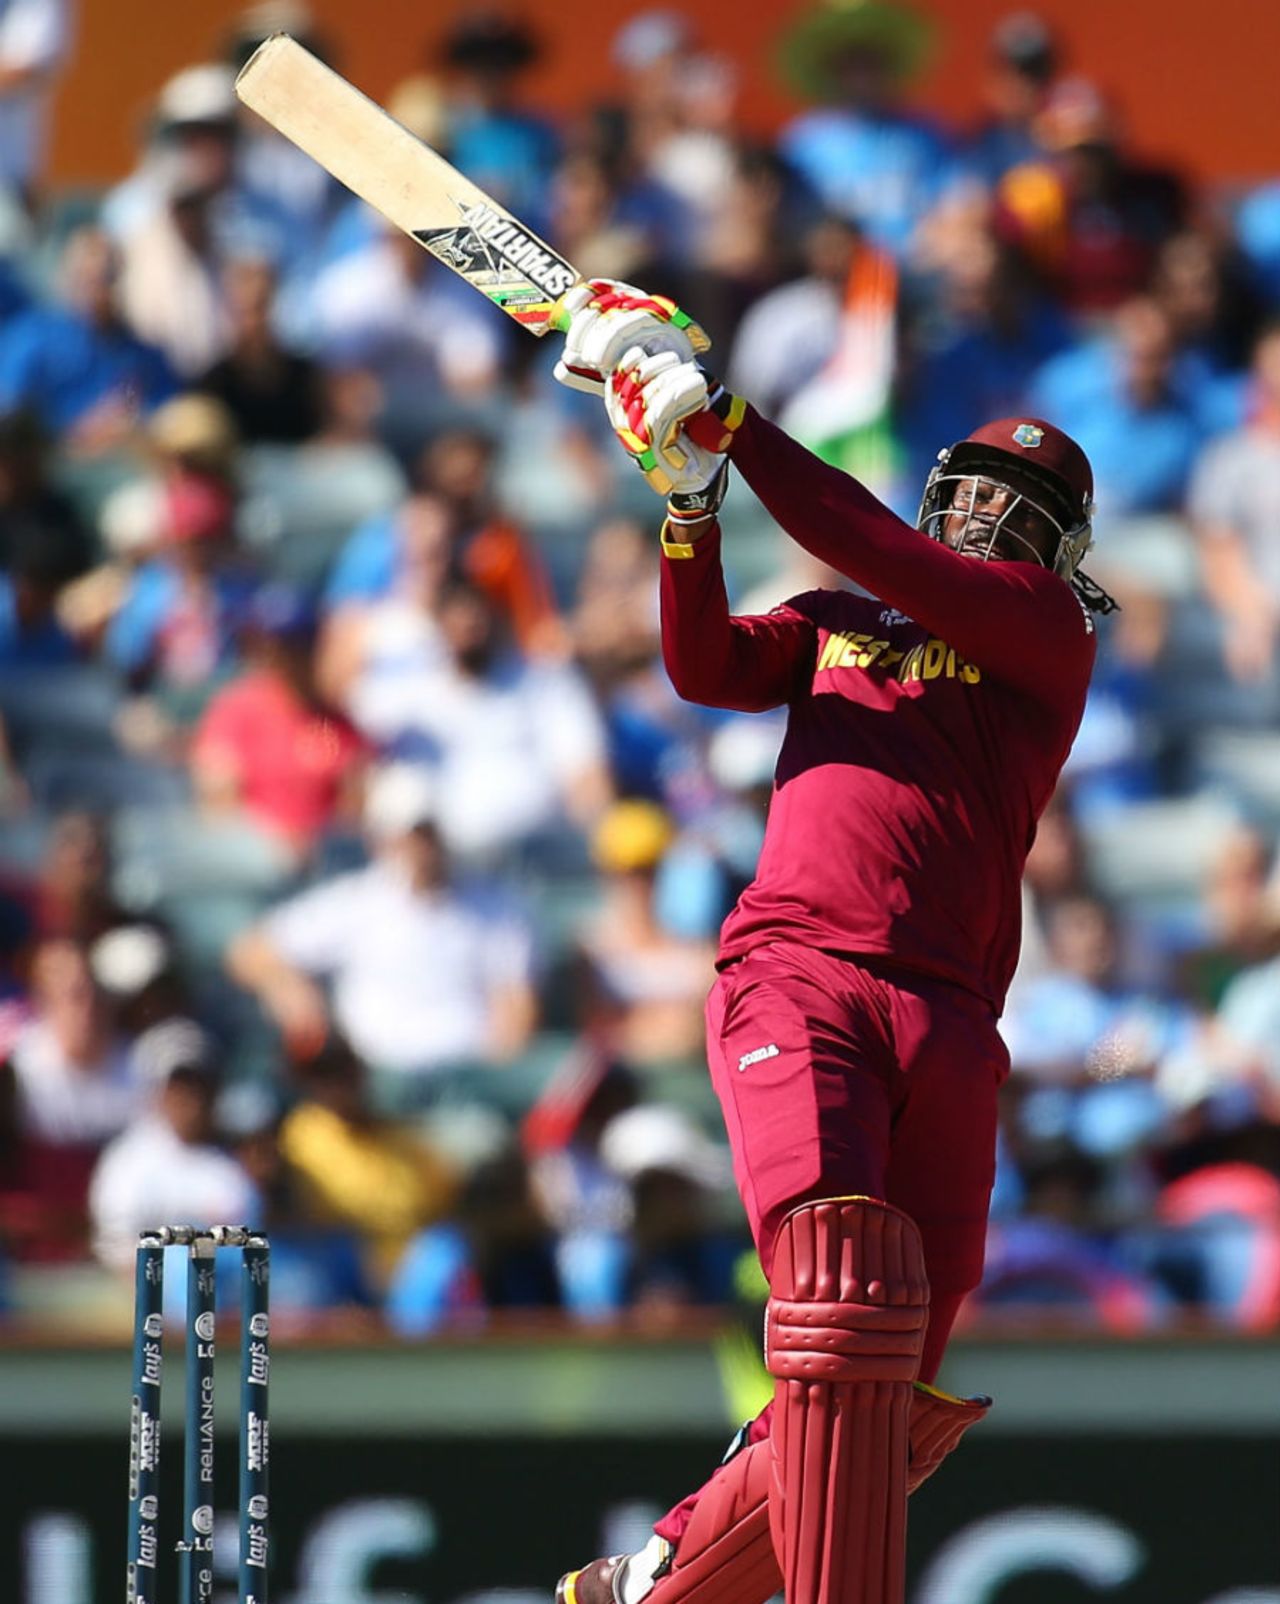 Chris Gayle gives it his all while playing a pull shot, India v West Indies, World Cup 2015, Group B, Perth, March 6